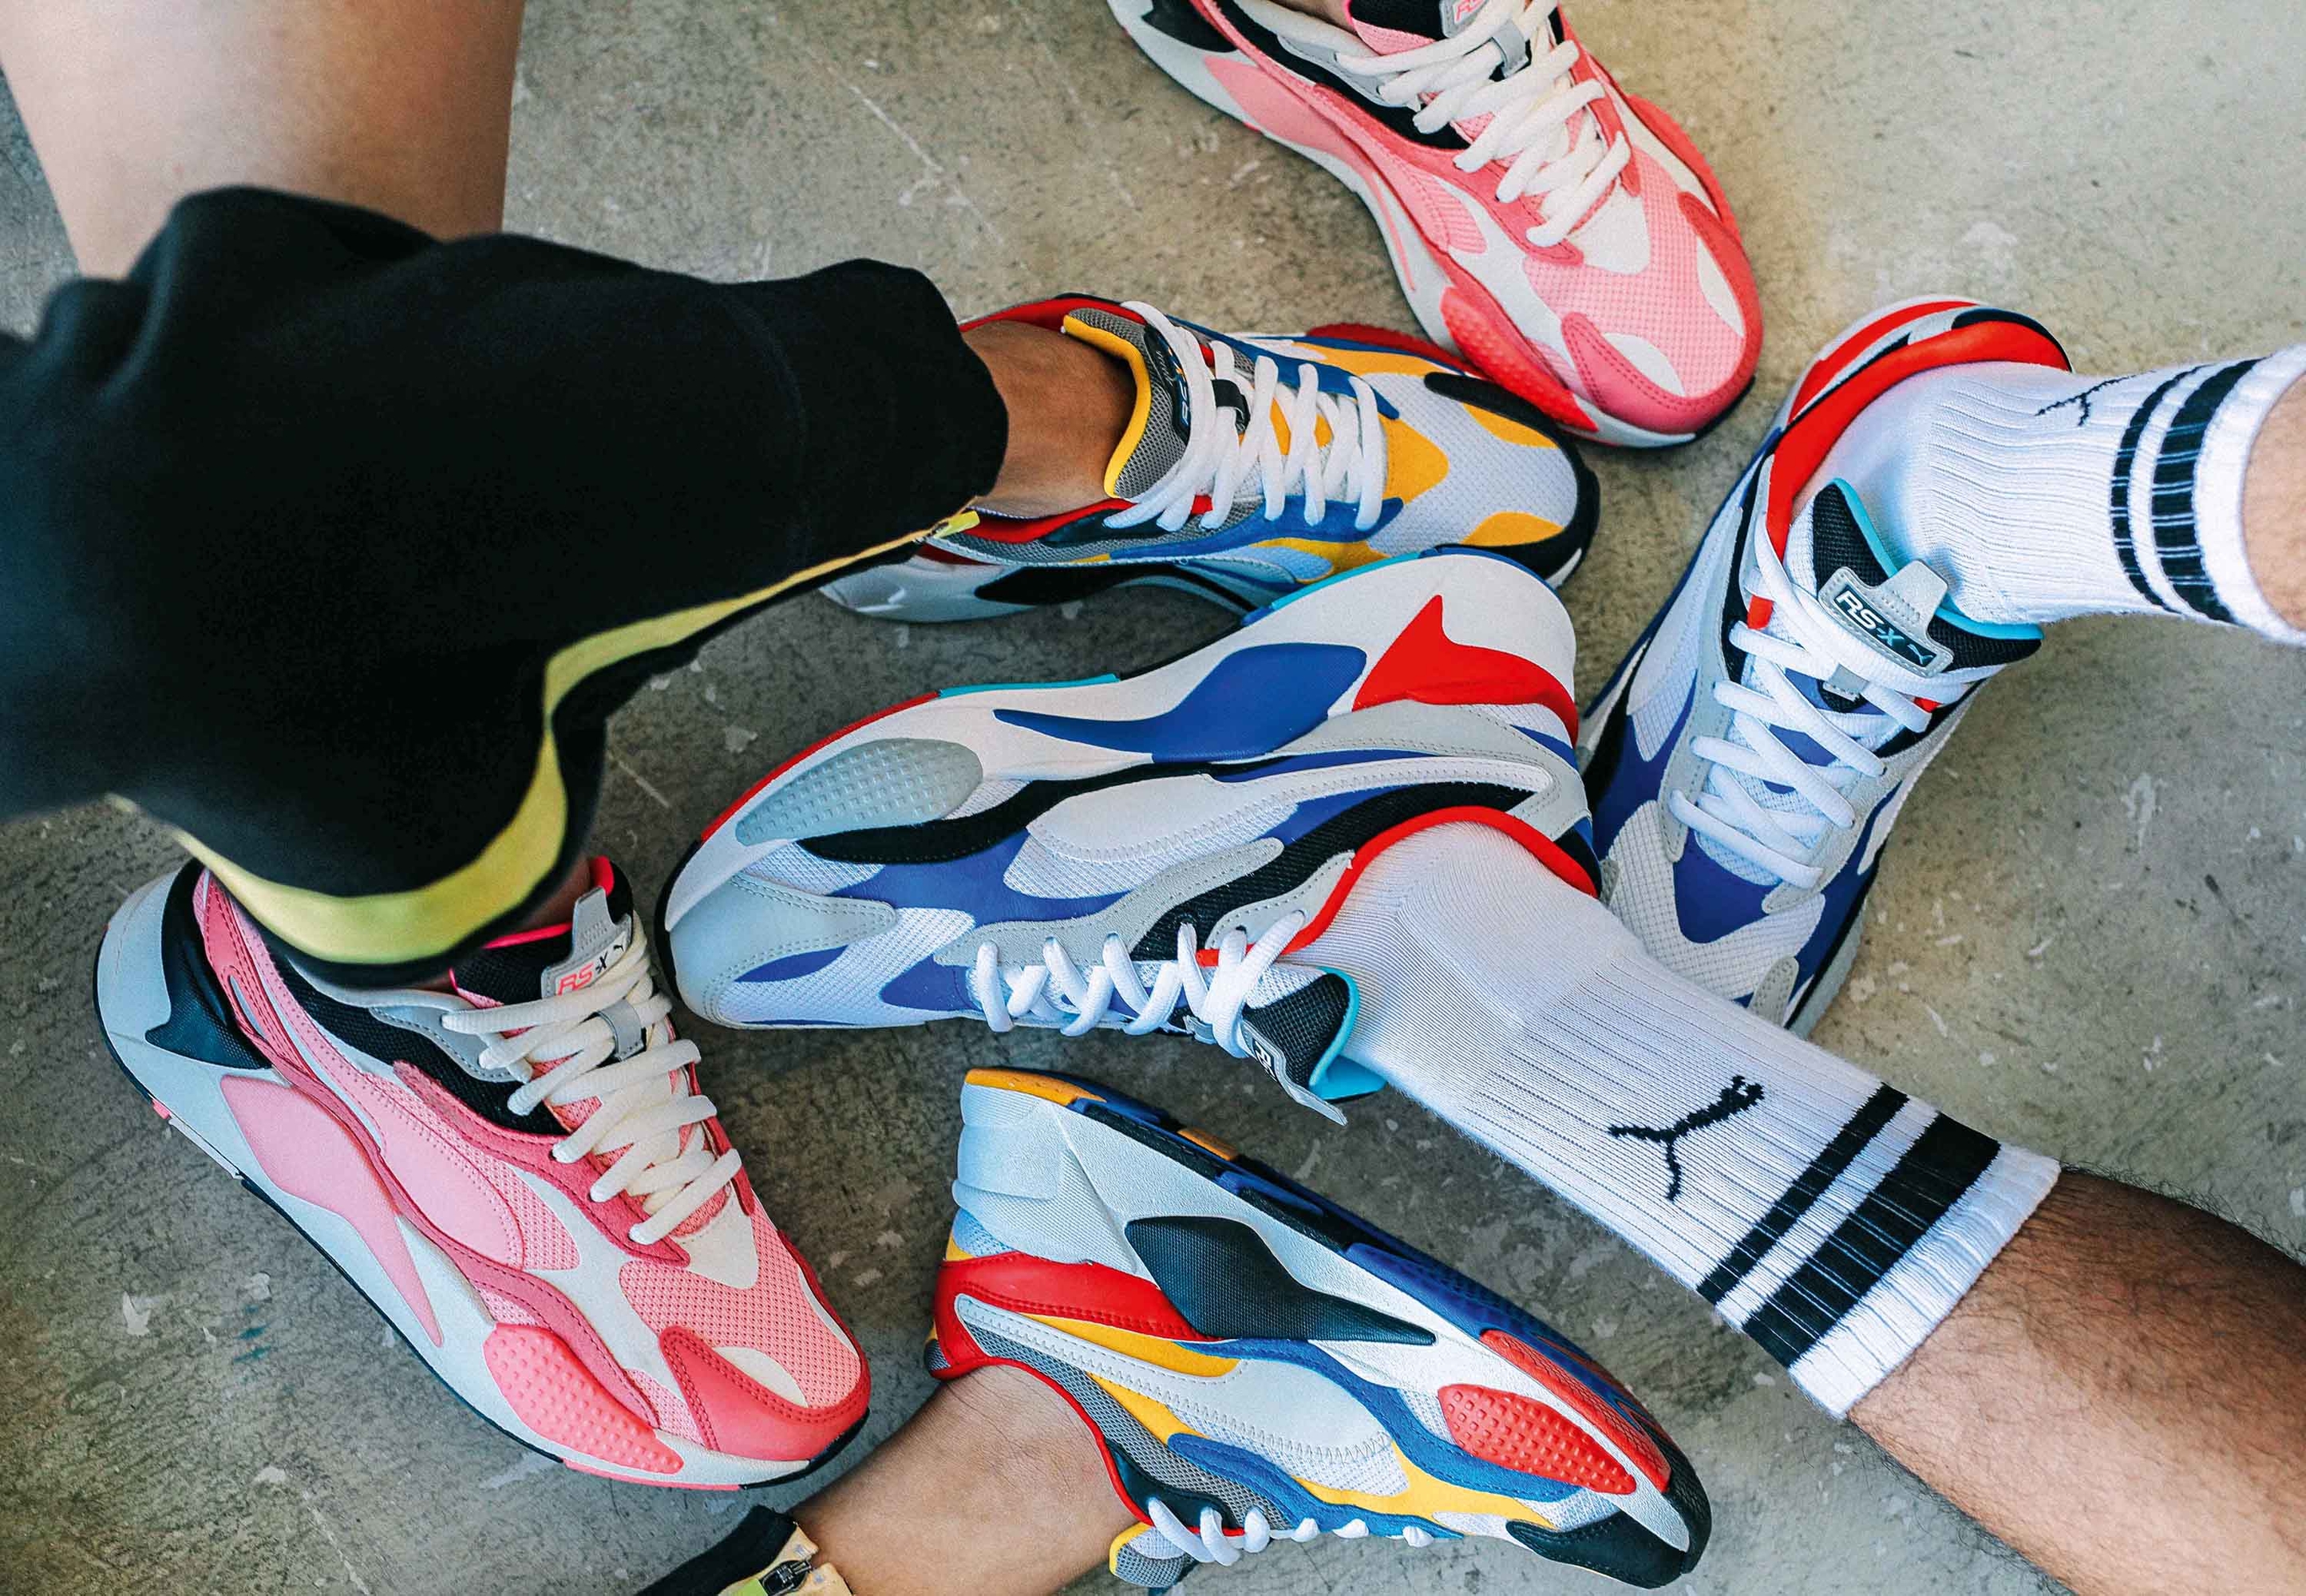 Talent Making Waves With New PUMA Sneakers